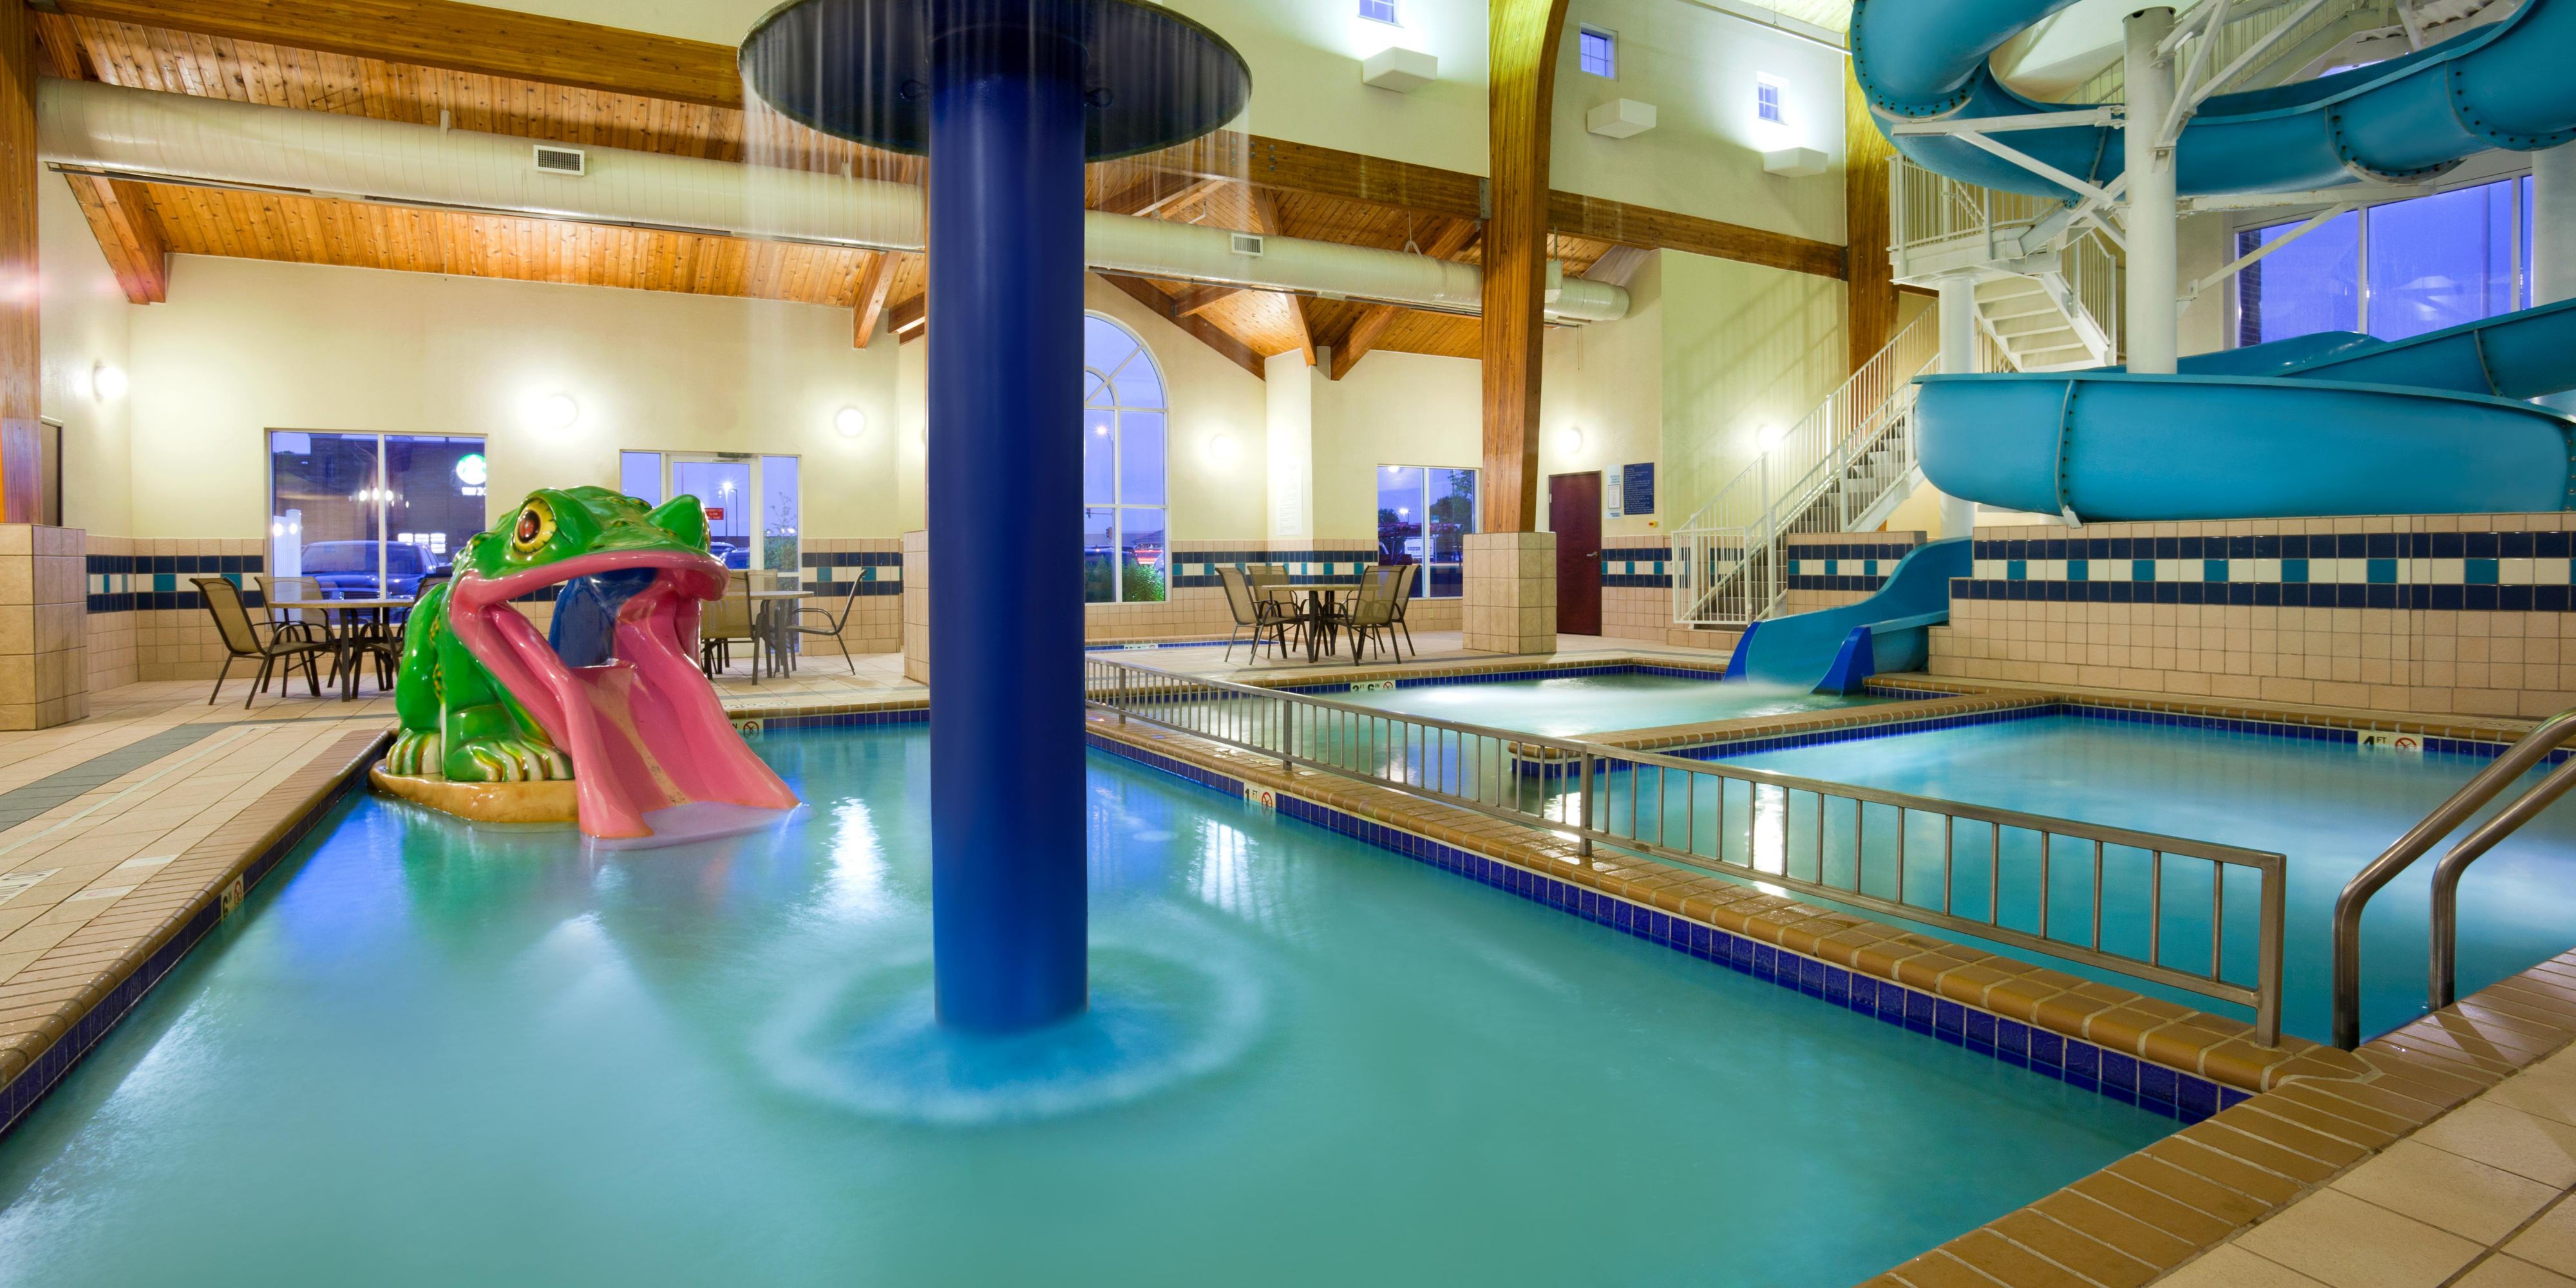 Our hotel comes equipped with an impressive water recreation area, providing fun for all ages. Our indoor pool features a 150 ft water slide, two whirlpools, and a kid's zone. For our guests' convenience, the hotel pool and water slide are open year-round. No matter the season, enjoy the accessibility of our refreshing pool area. 